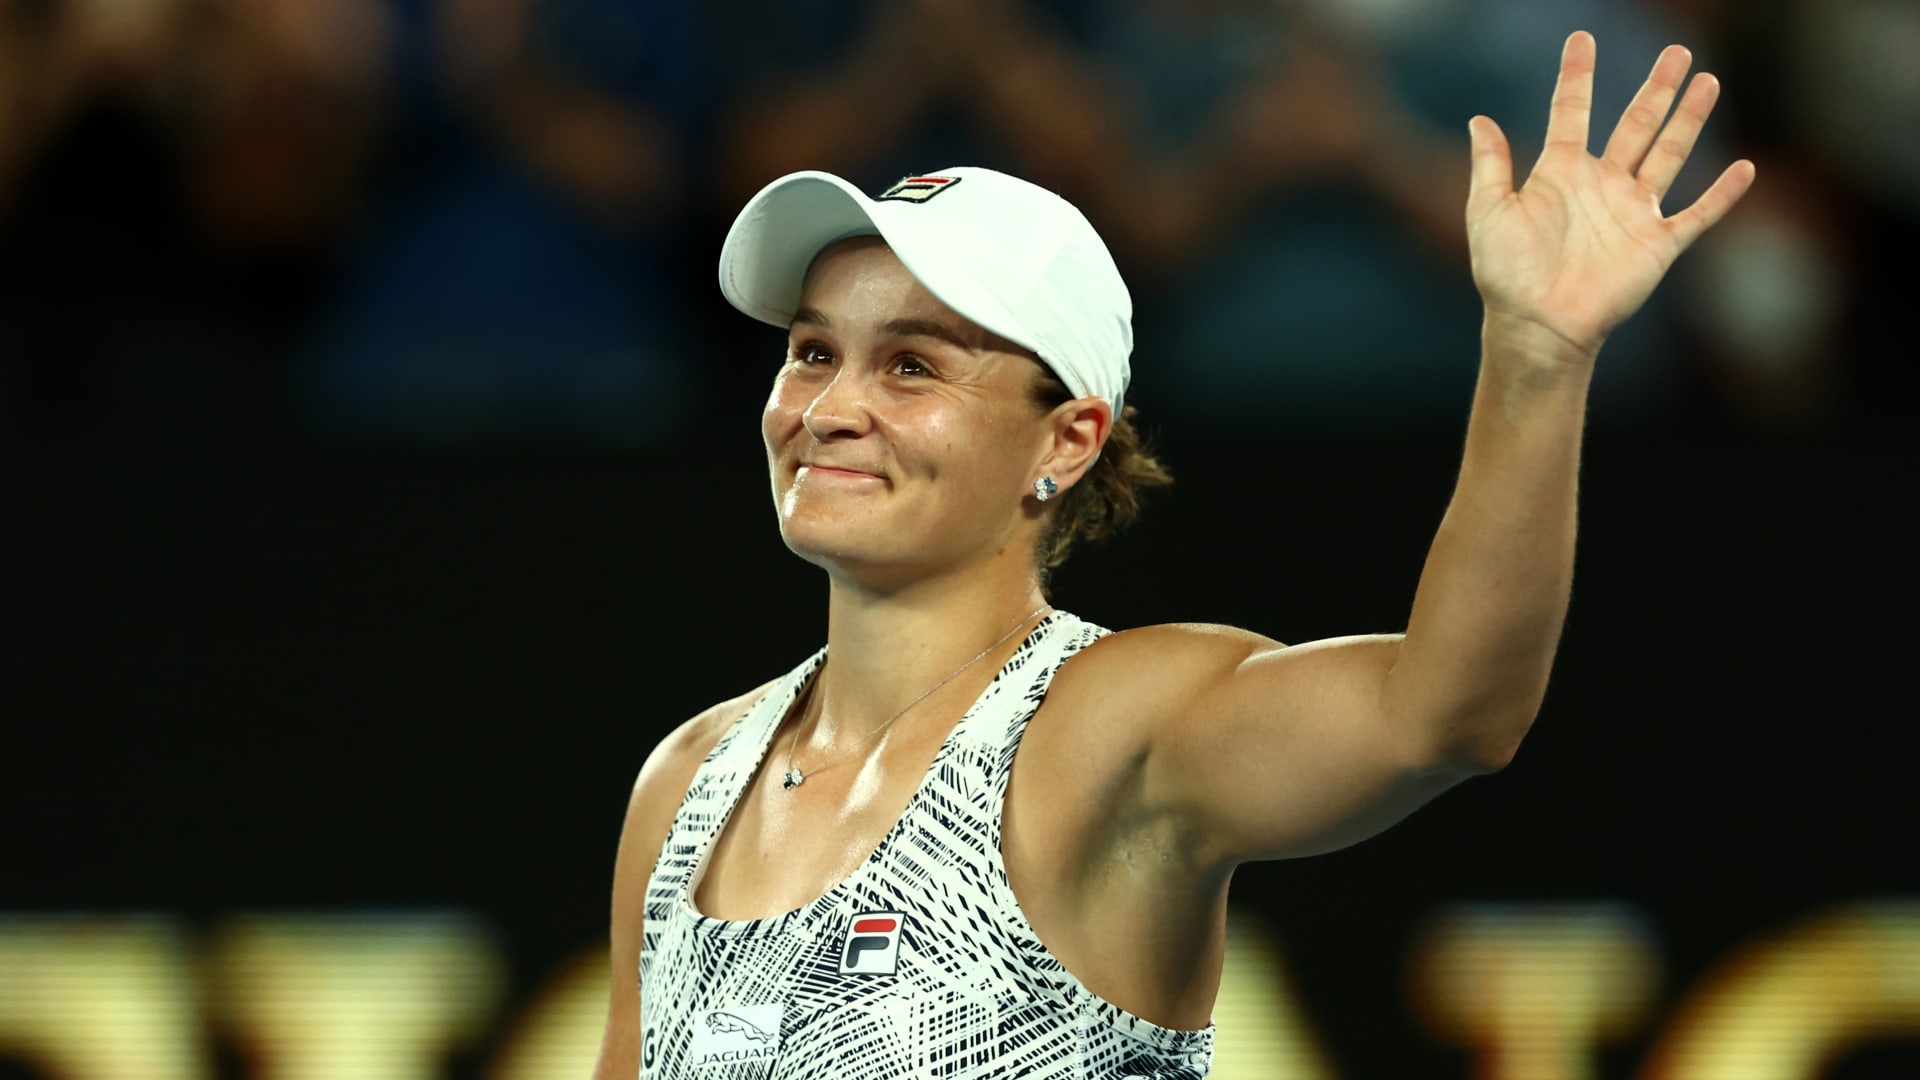 Going out on top Even in retirement, Ashleigh Barty has always stayed true to herself